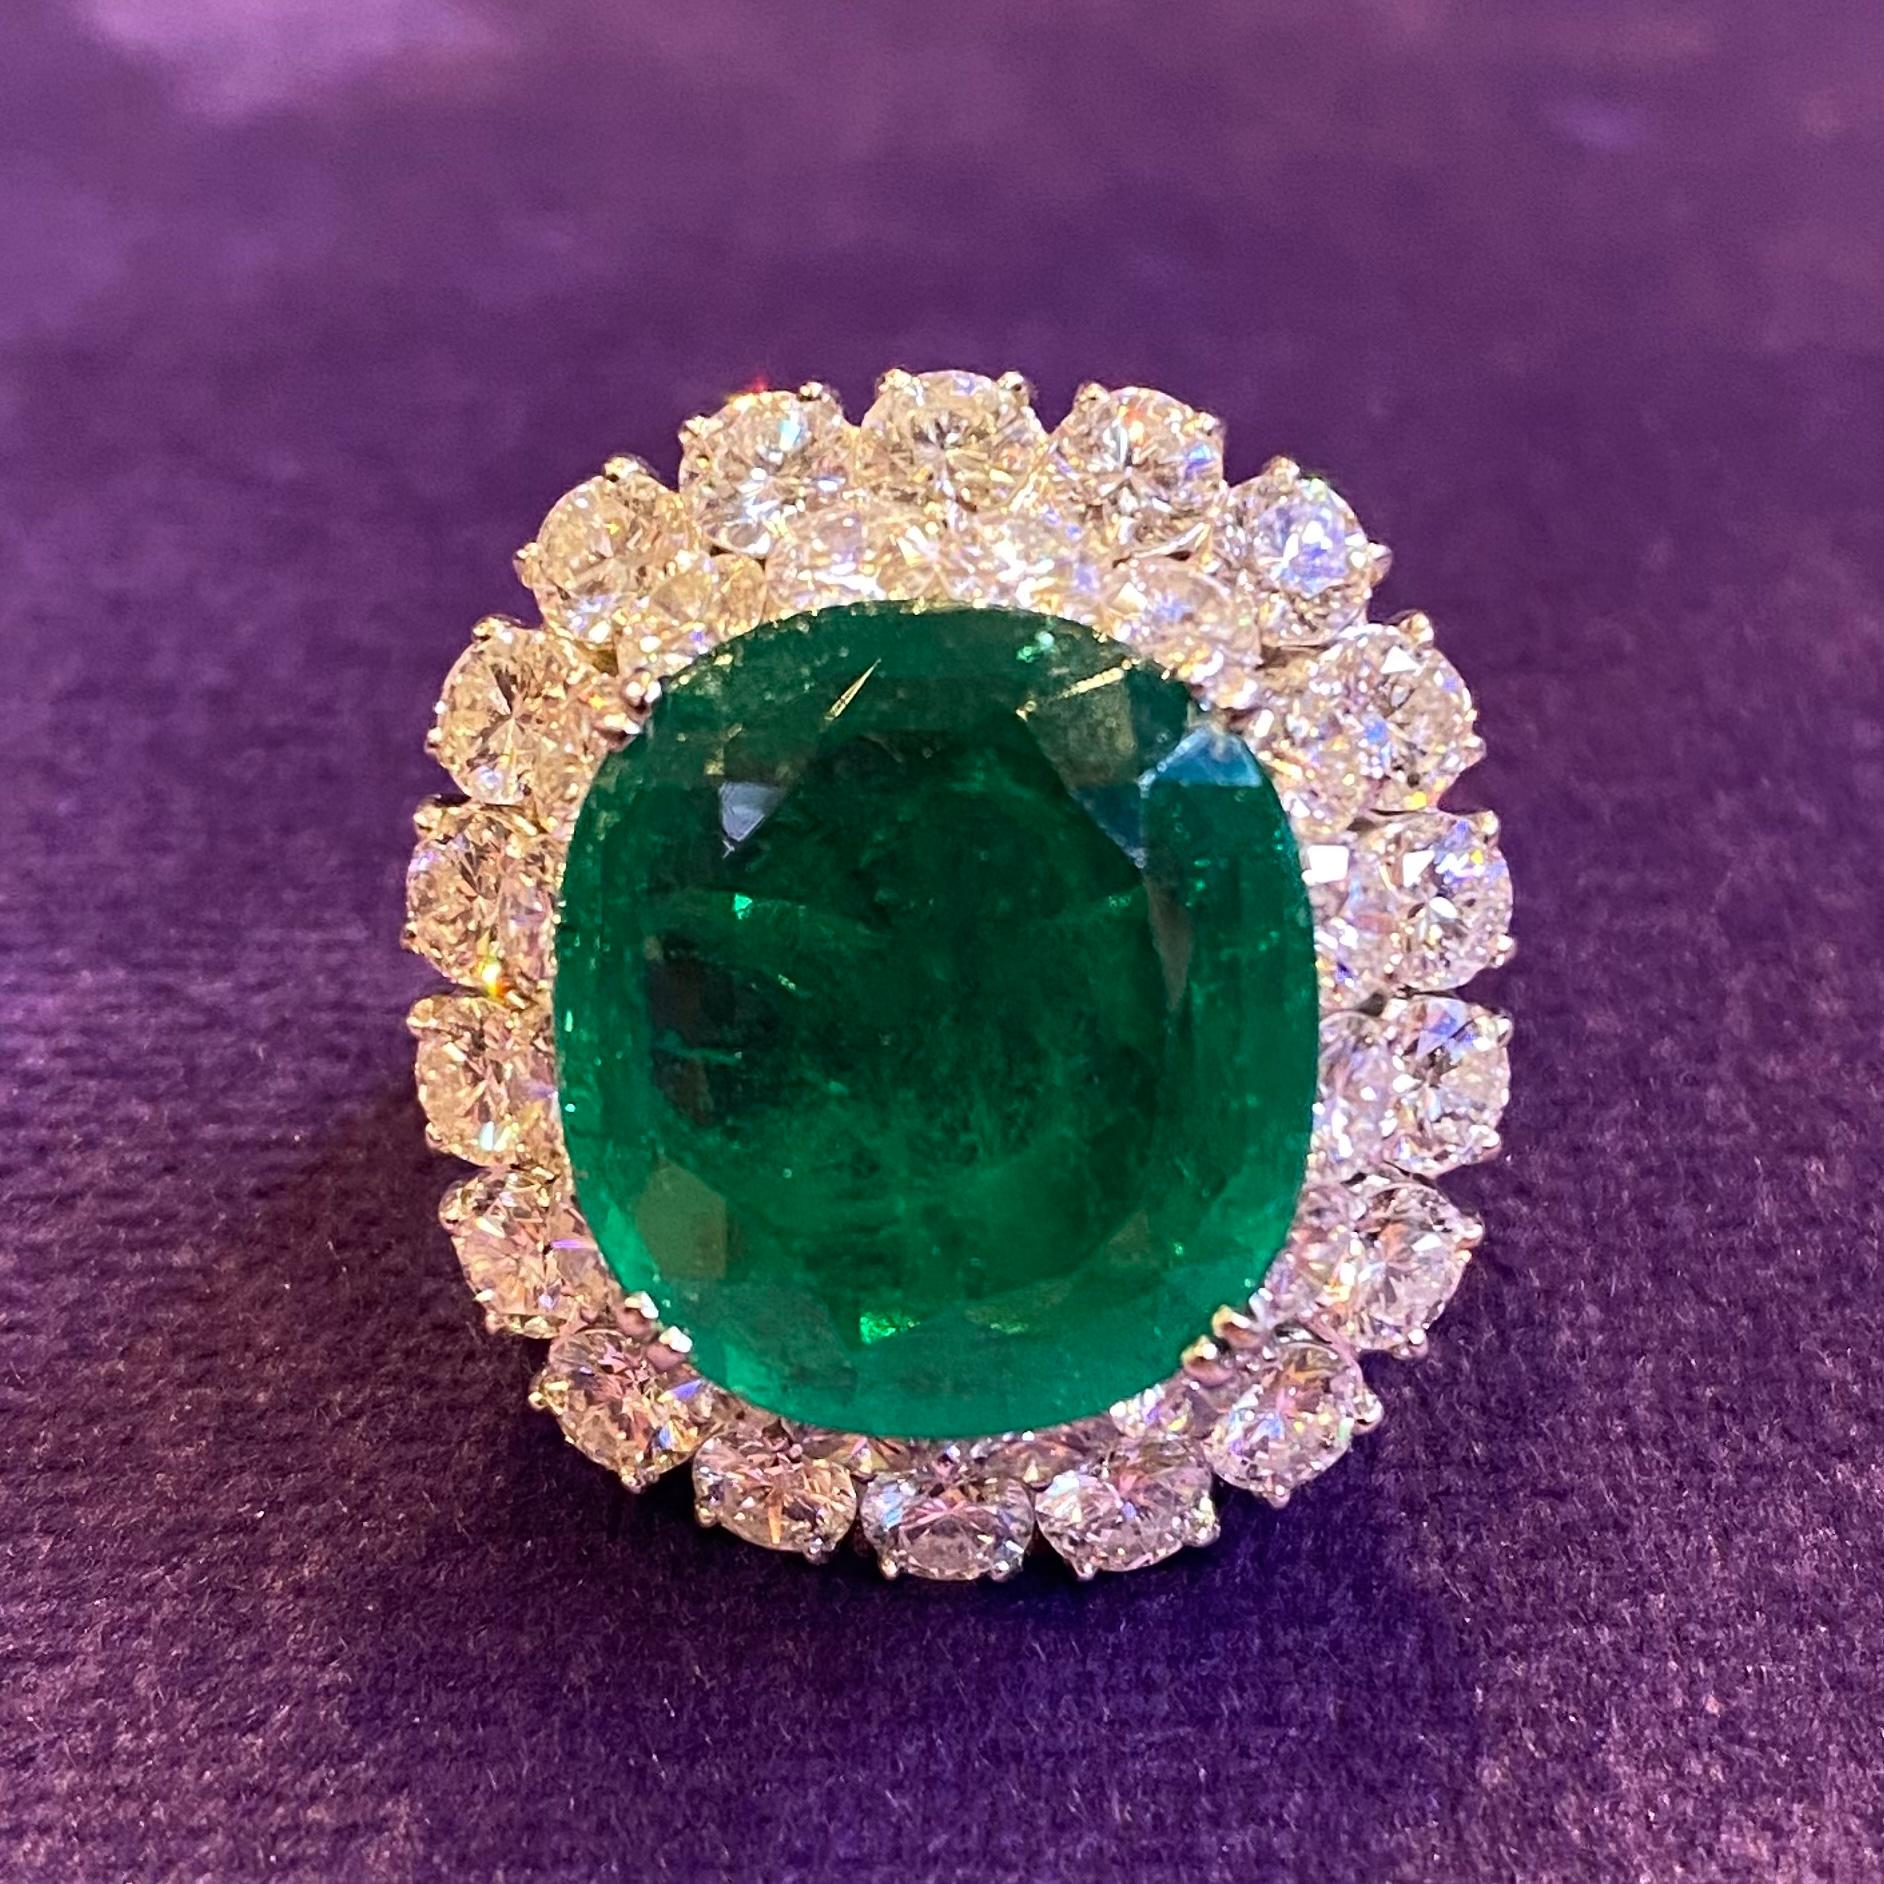 10.64 Carat Certified Colombian Emerald Ring by Bvlgari For Sale 1